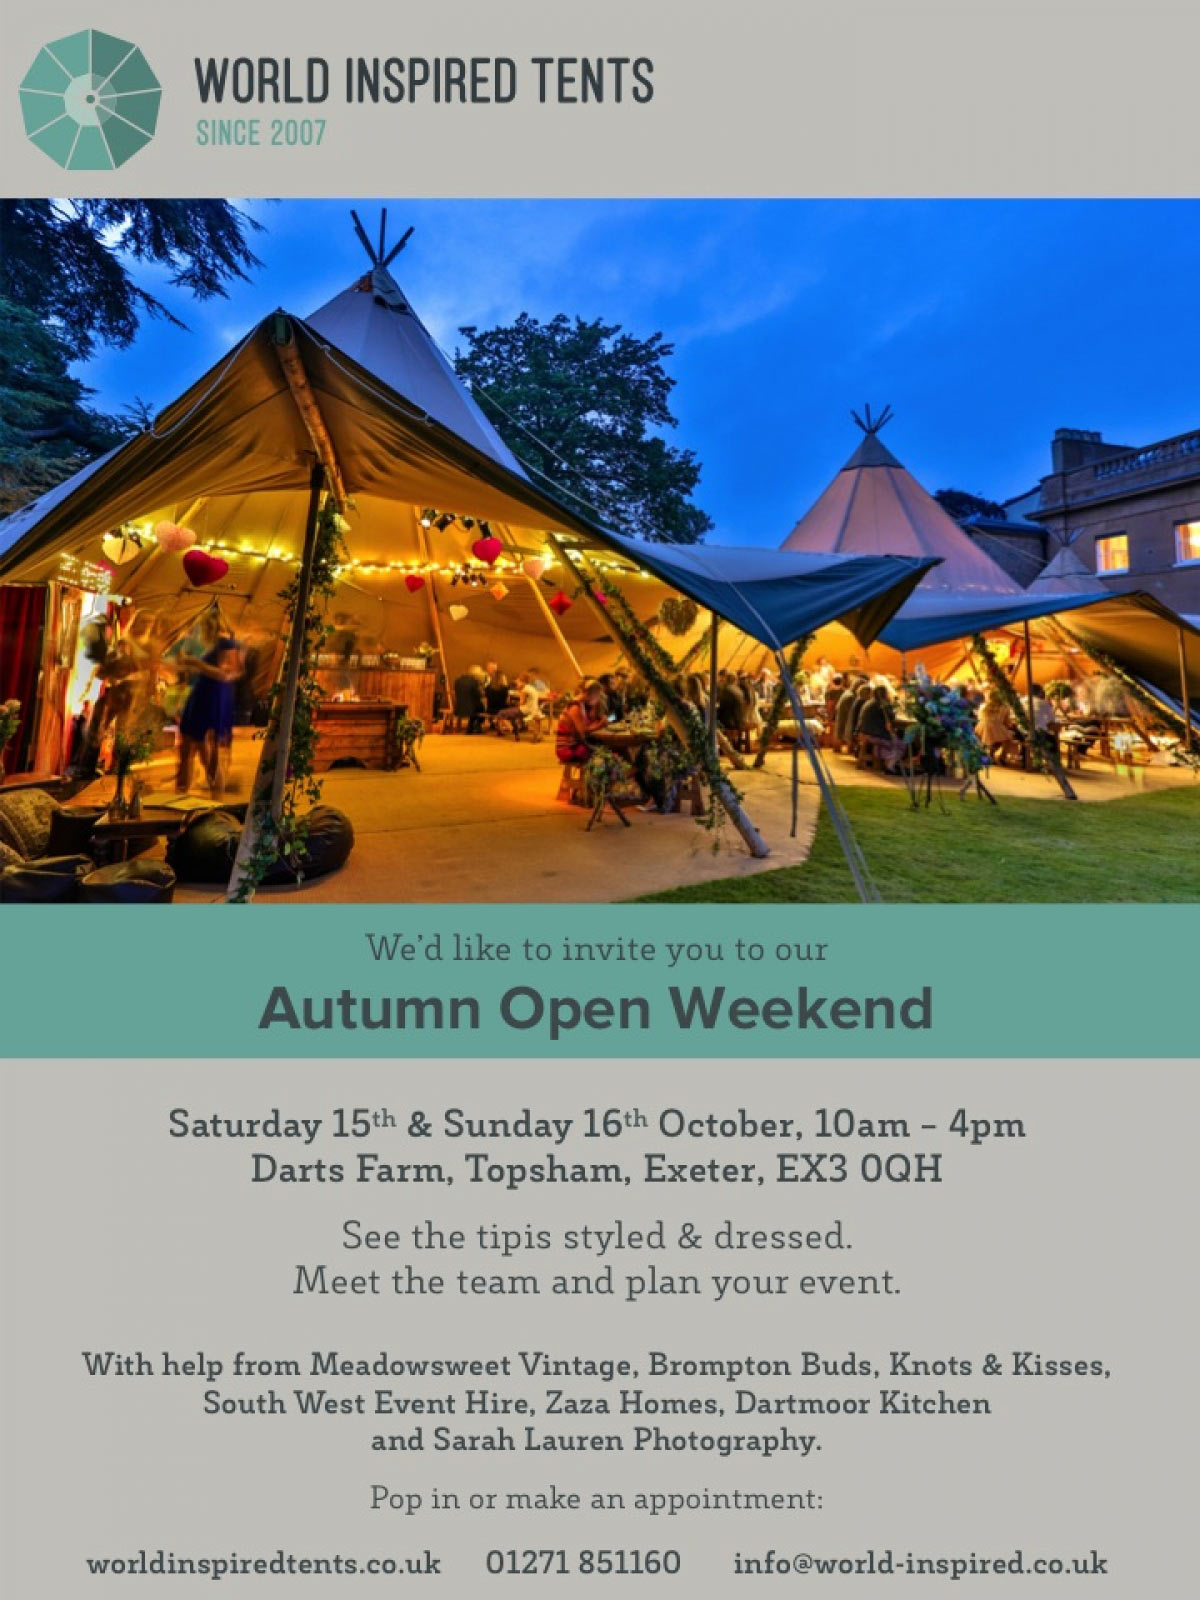 Open weekend at World Inspired Tents